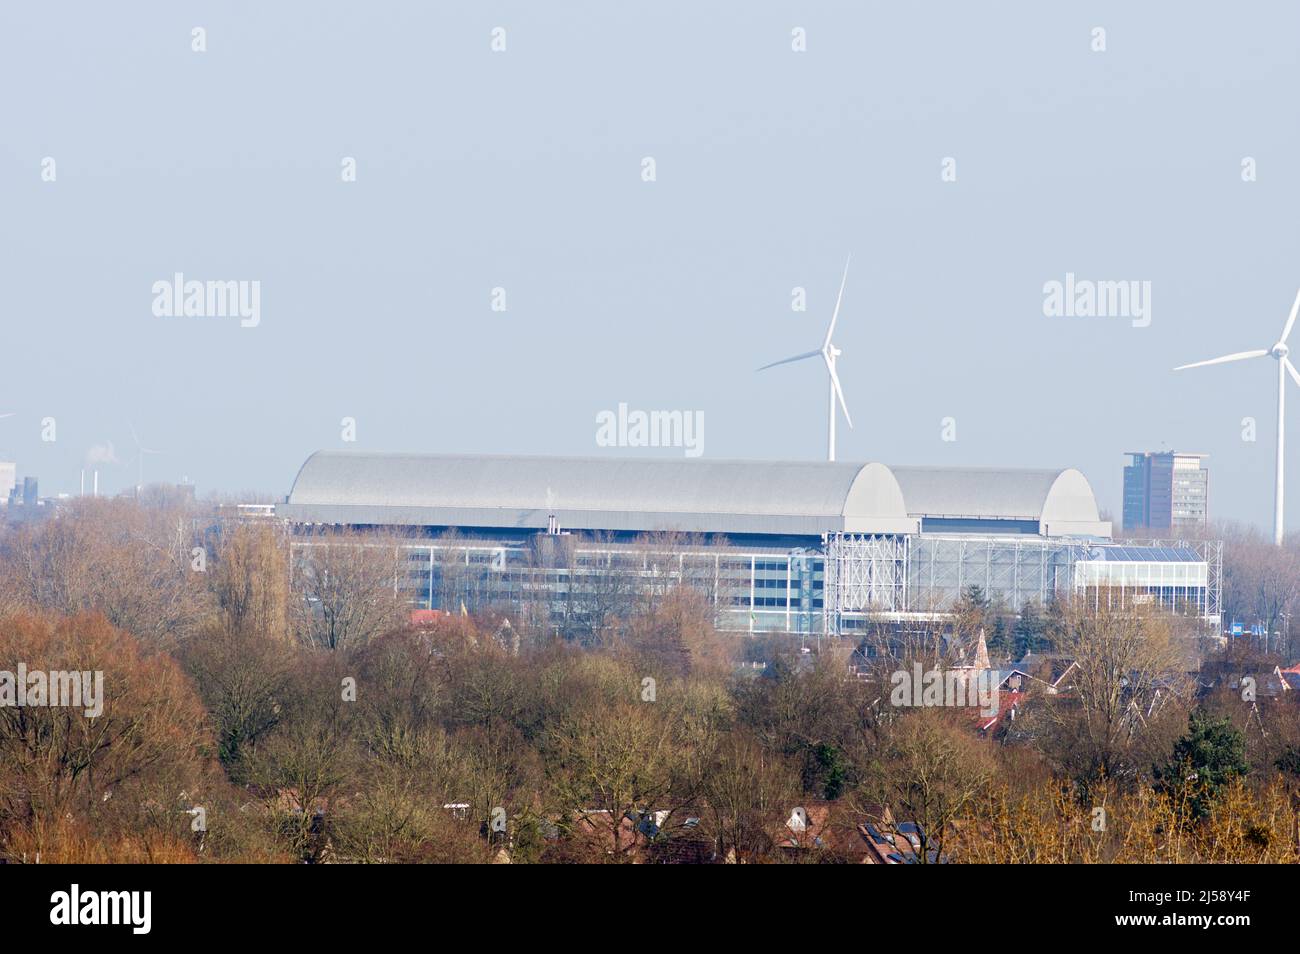 Arnhem, Netherlands - March 5, 2022: Aerial view of the Gelredome stadium. Gelredome is a football stadium in the city of Arnhem Stock Photo